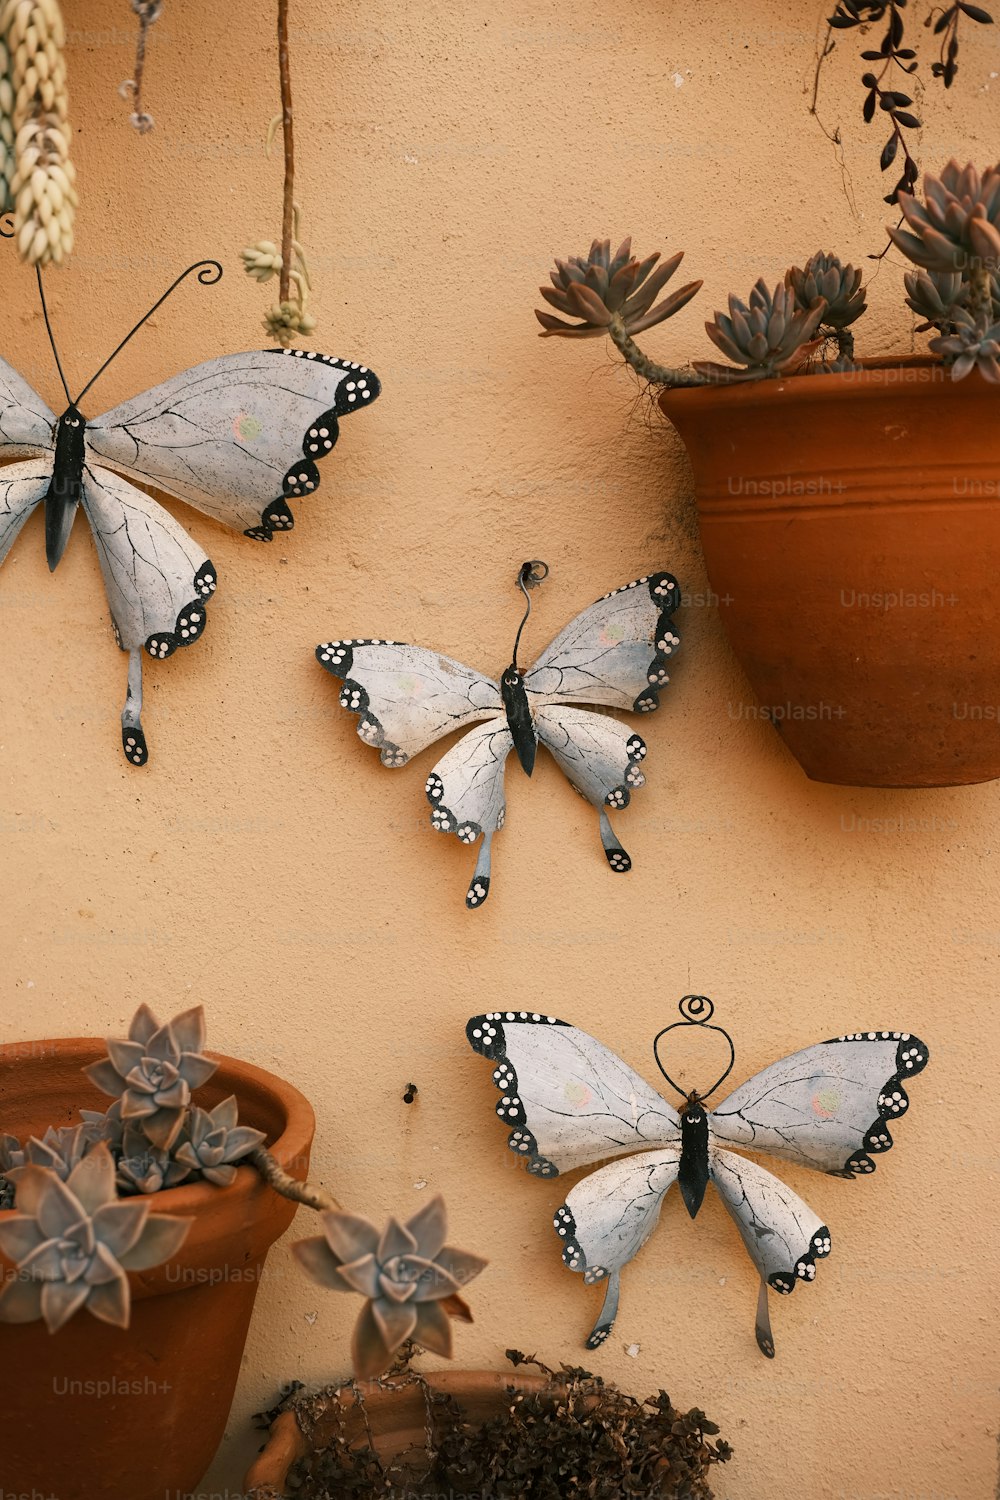 three butterflies are hanging on a wall next to a potted plant